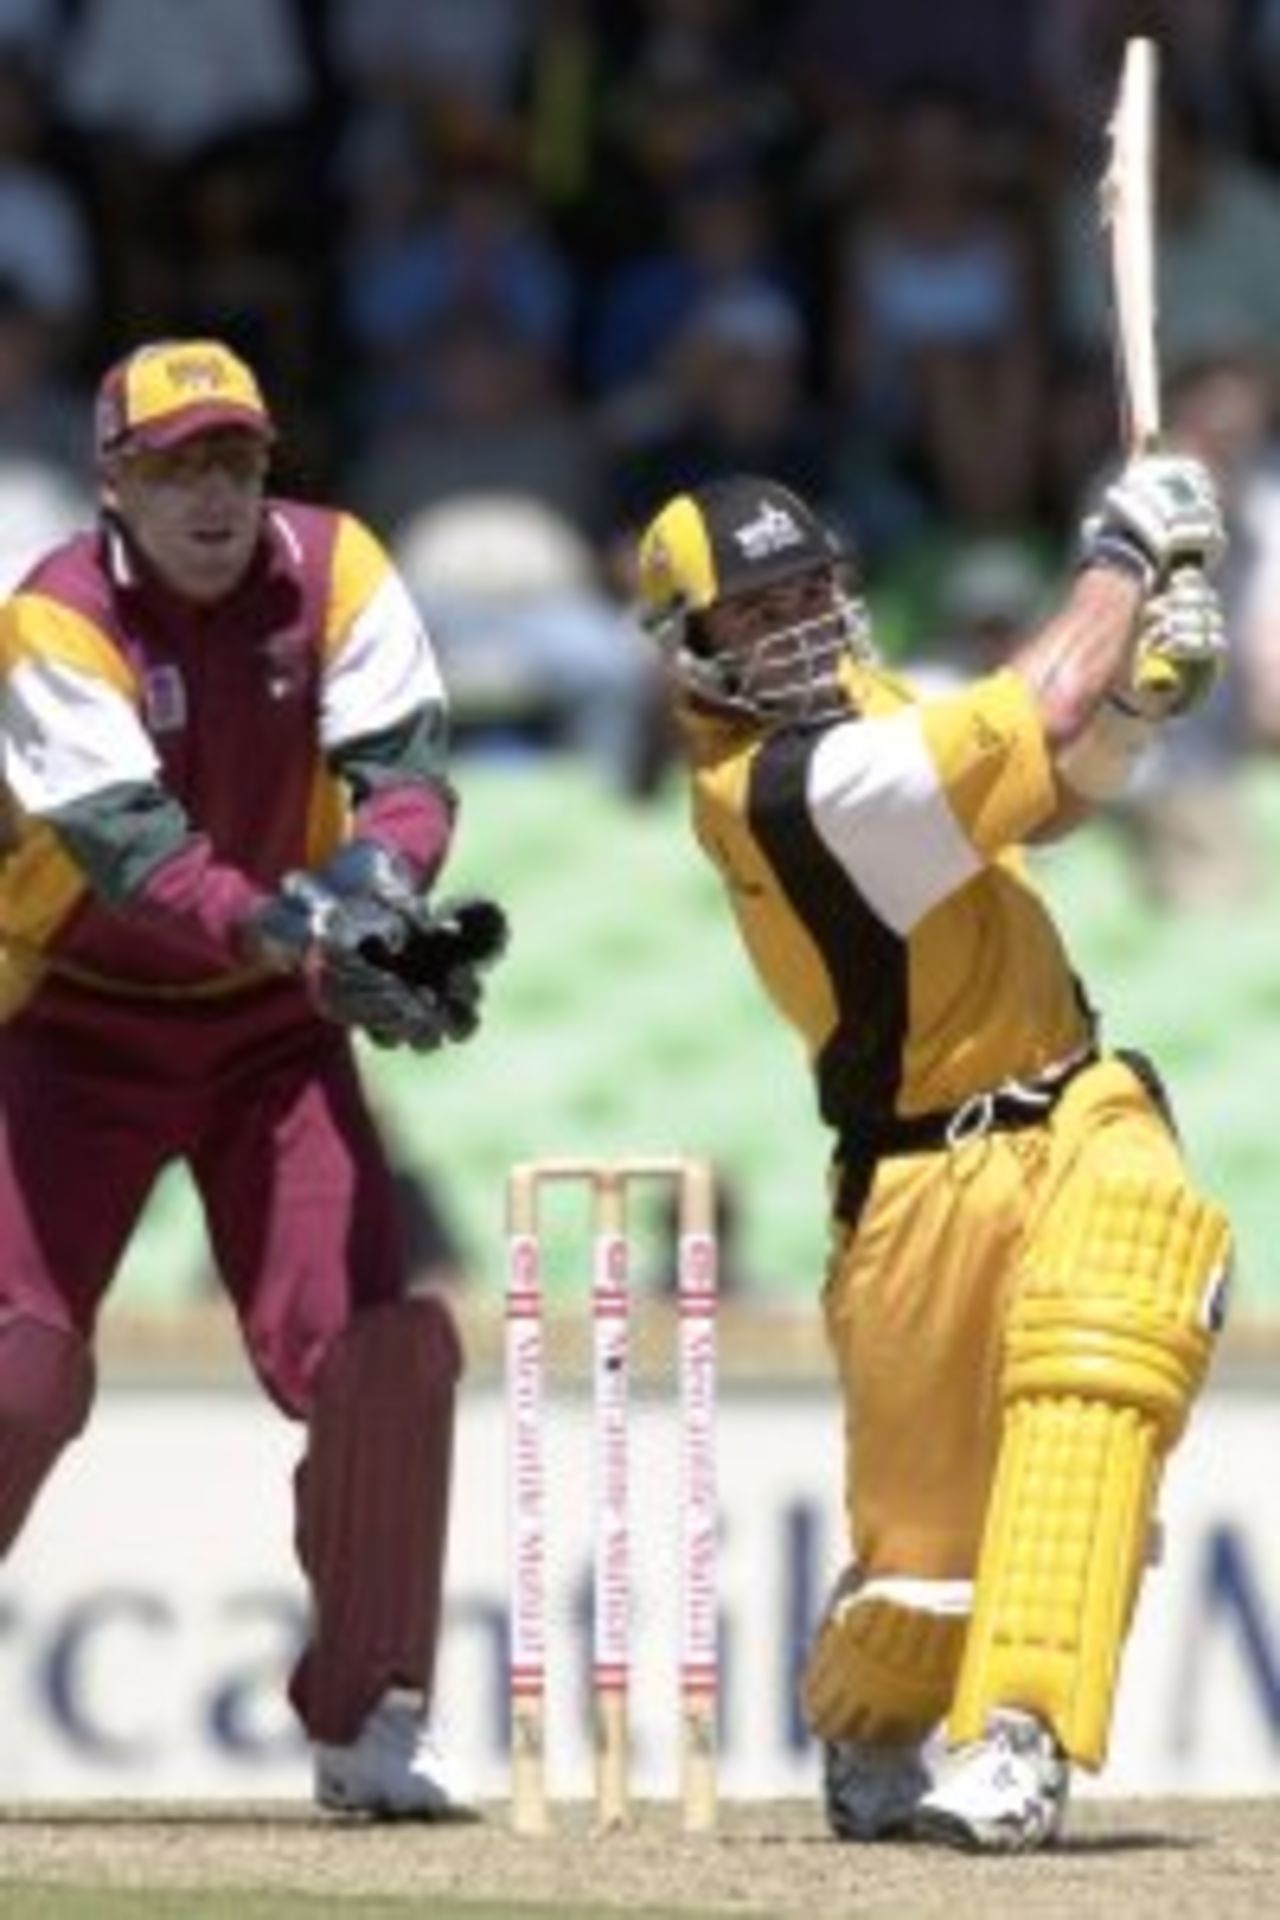 27 Feb 2000: Ryan Campbell of the Western Warriors smashes a ball to the boundry on his way to scoring a toatal of 108 runs, as Queensland Bulls wicketkeeper Wade Secombe looks on, during the Mercantile Mutual one day cricket final played at the WACA, Perth Australia.